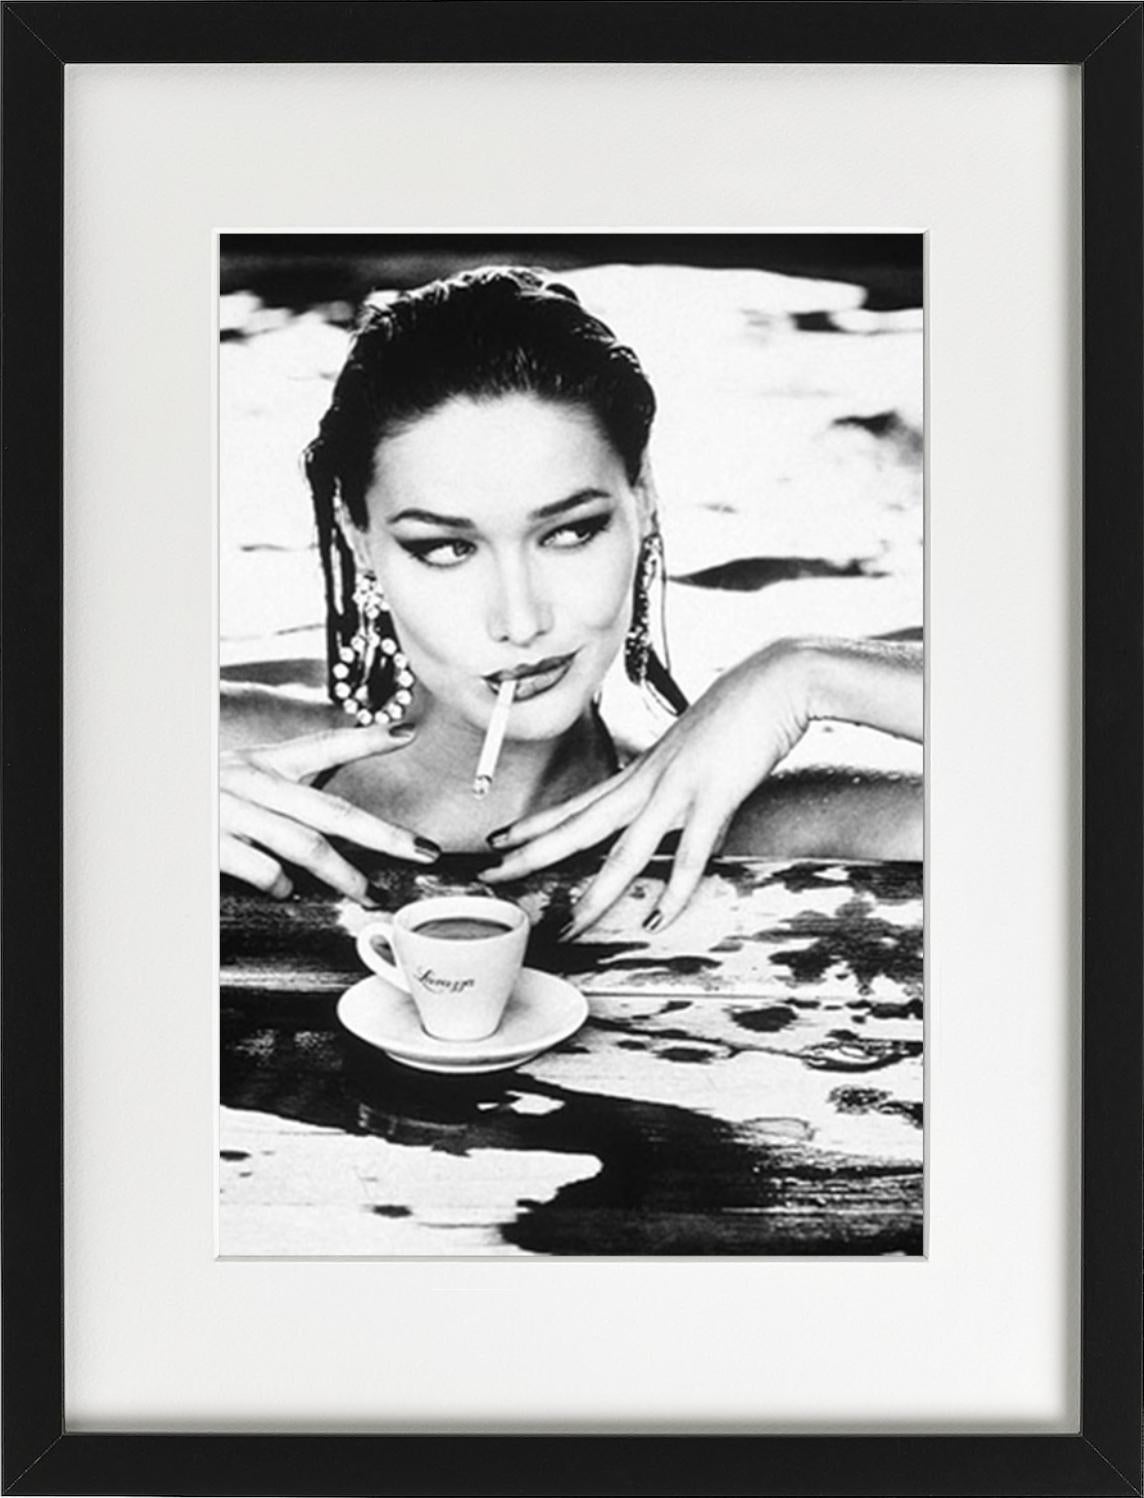 All prints are limited edition. Available in multiple sizes. High-end framing on request.

All prints are done and signed by the artist. The collector receives an additional certificate of authenticity from the gallery.

Carla Bruni is an Italian